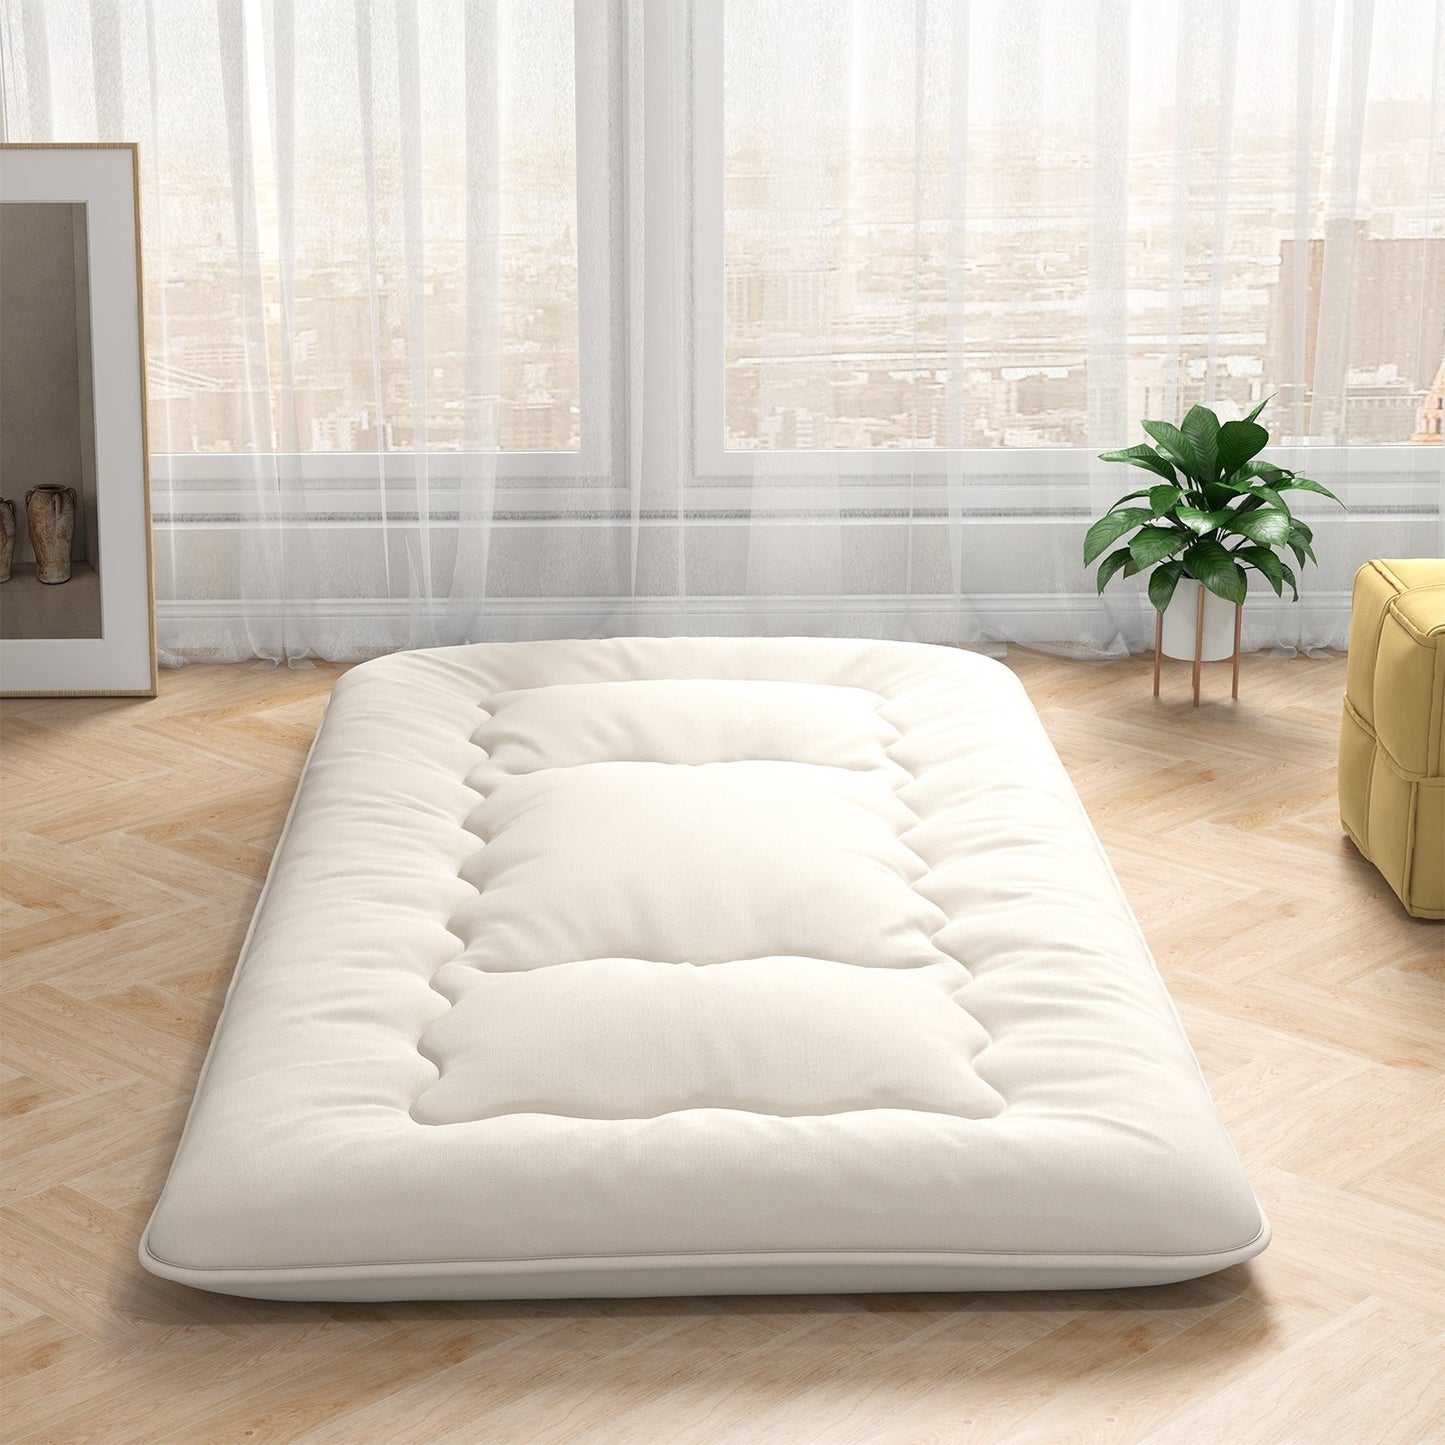 Queen/King/Twin/Full Futon Mattress Floor Sleeping Pad with Washable Cover Beige-Twin Size, Beige